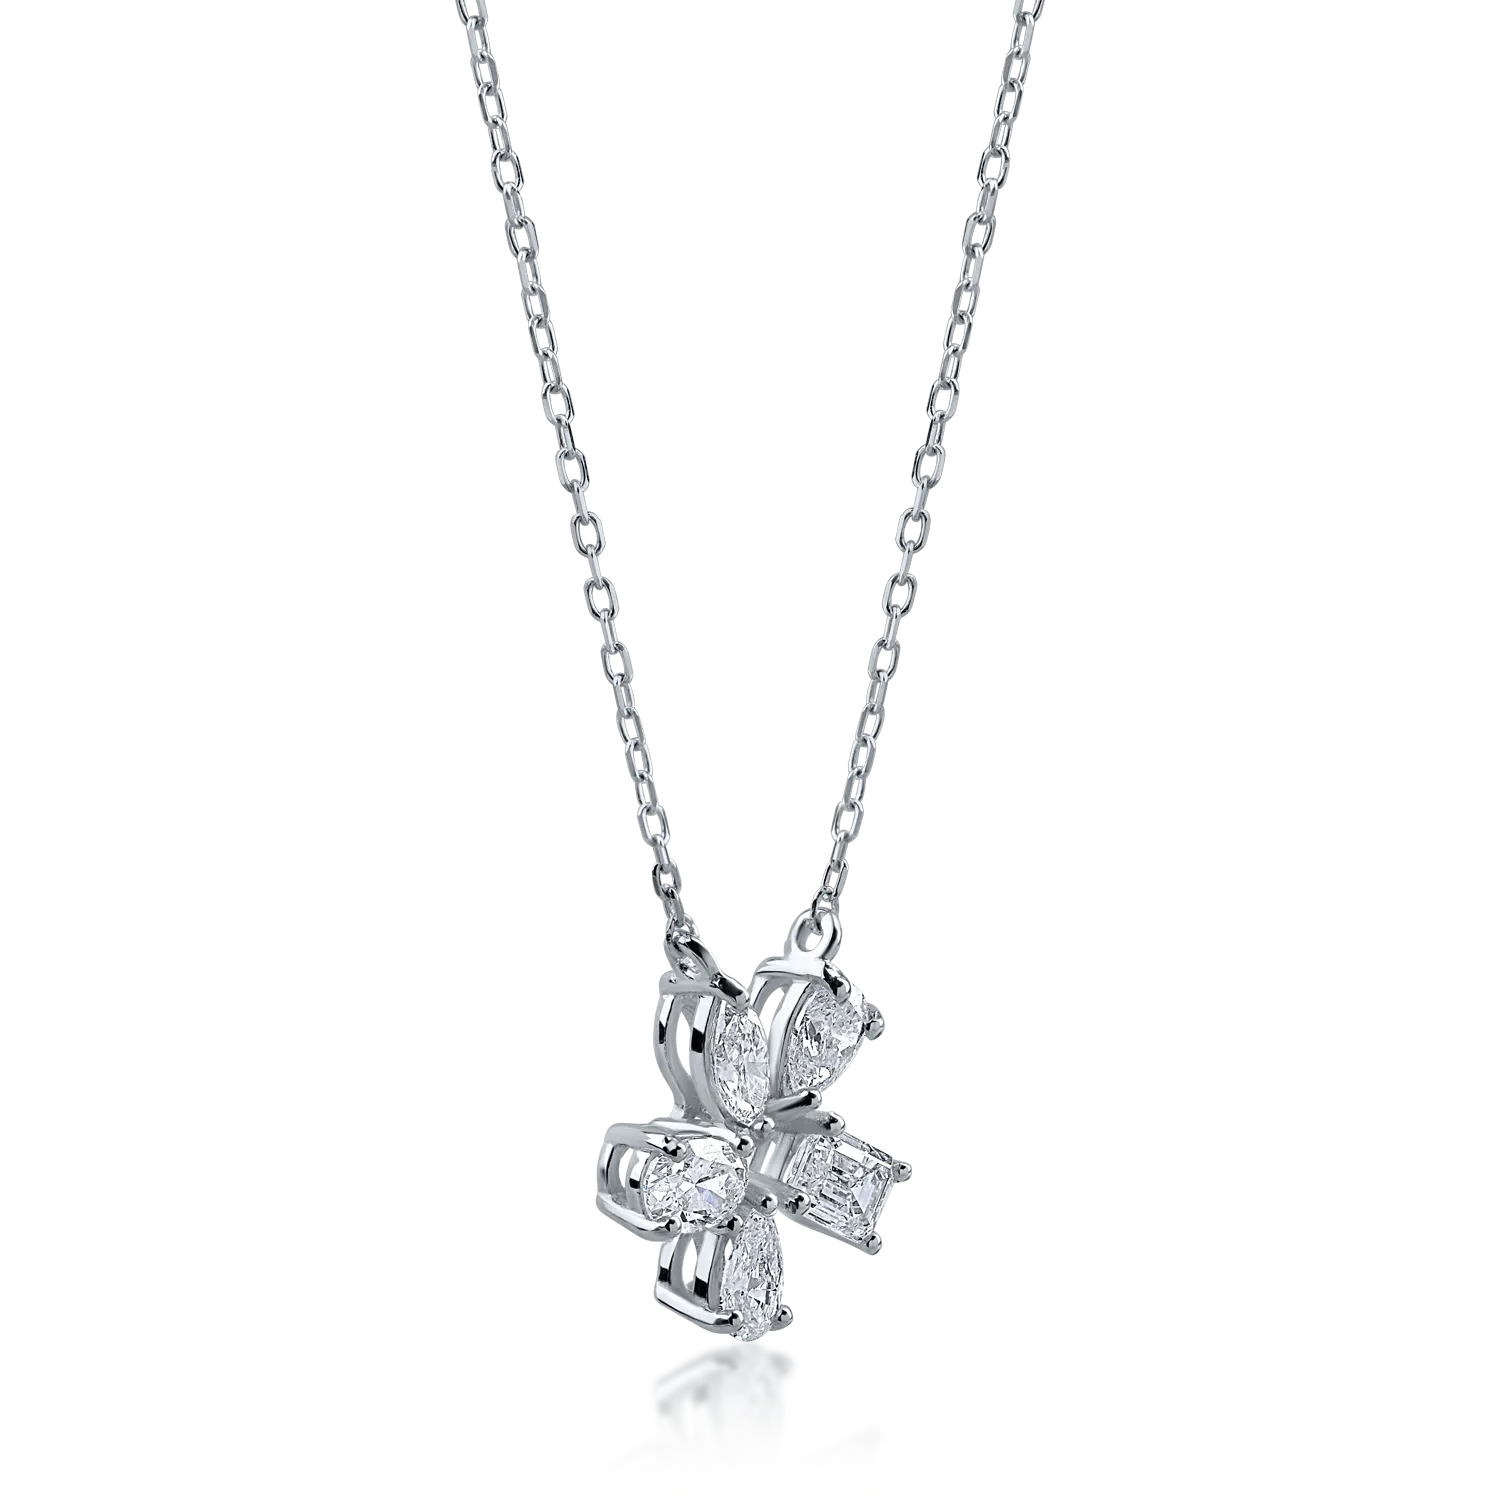 White gold flower pendant necklace with 0.61ct diamonds